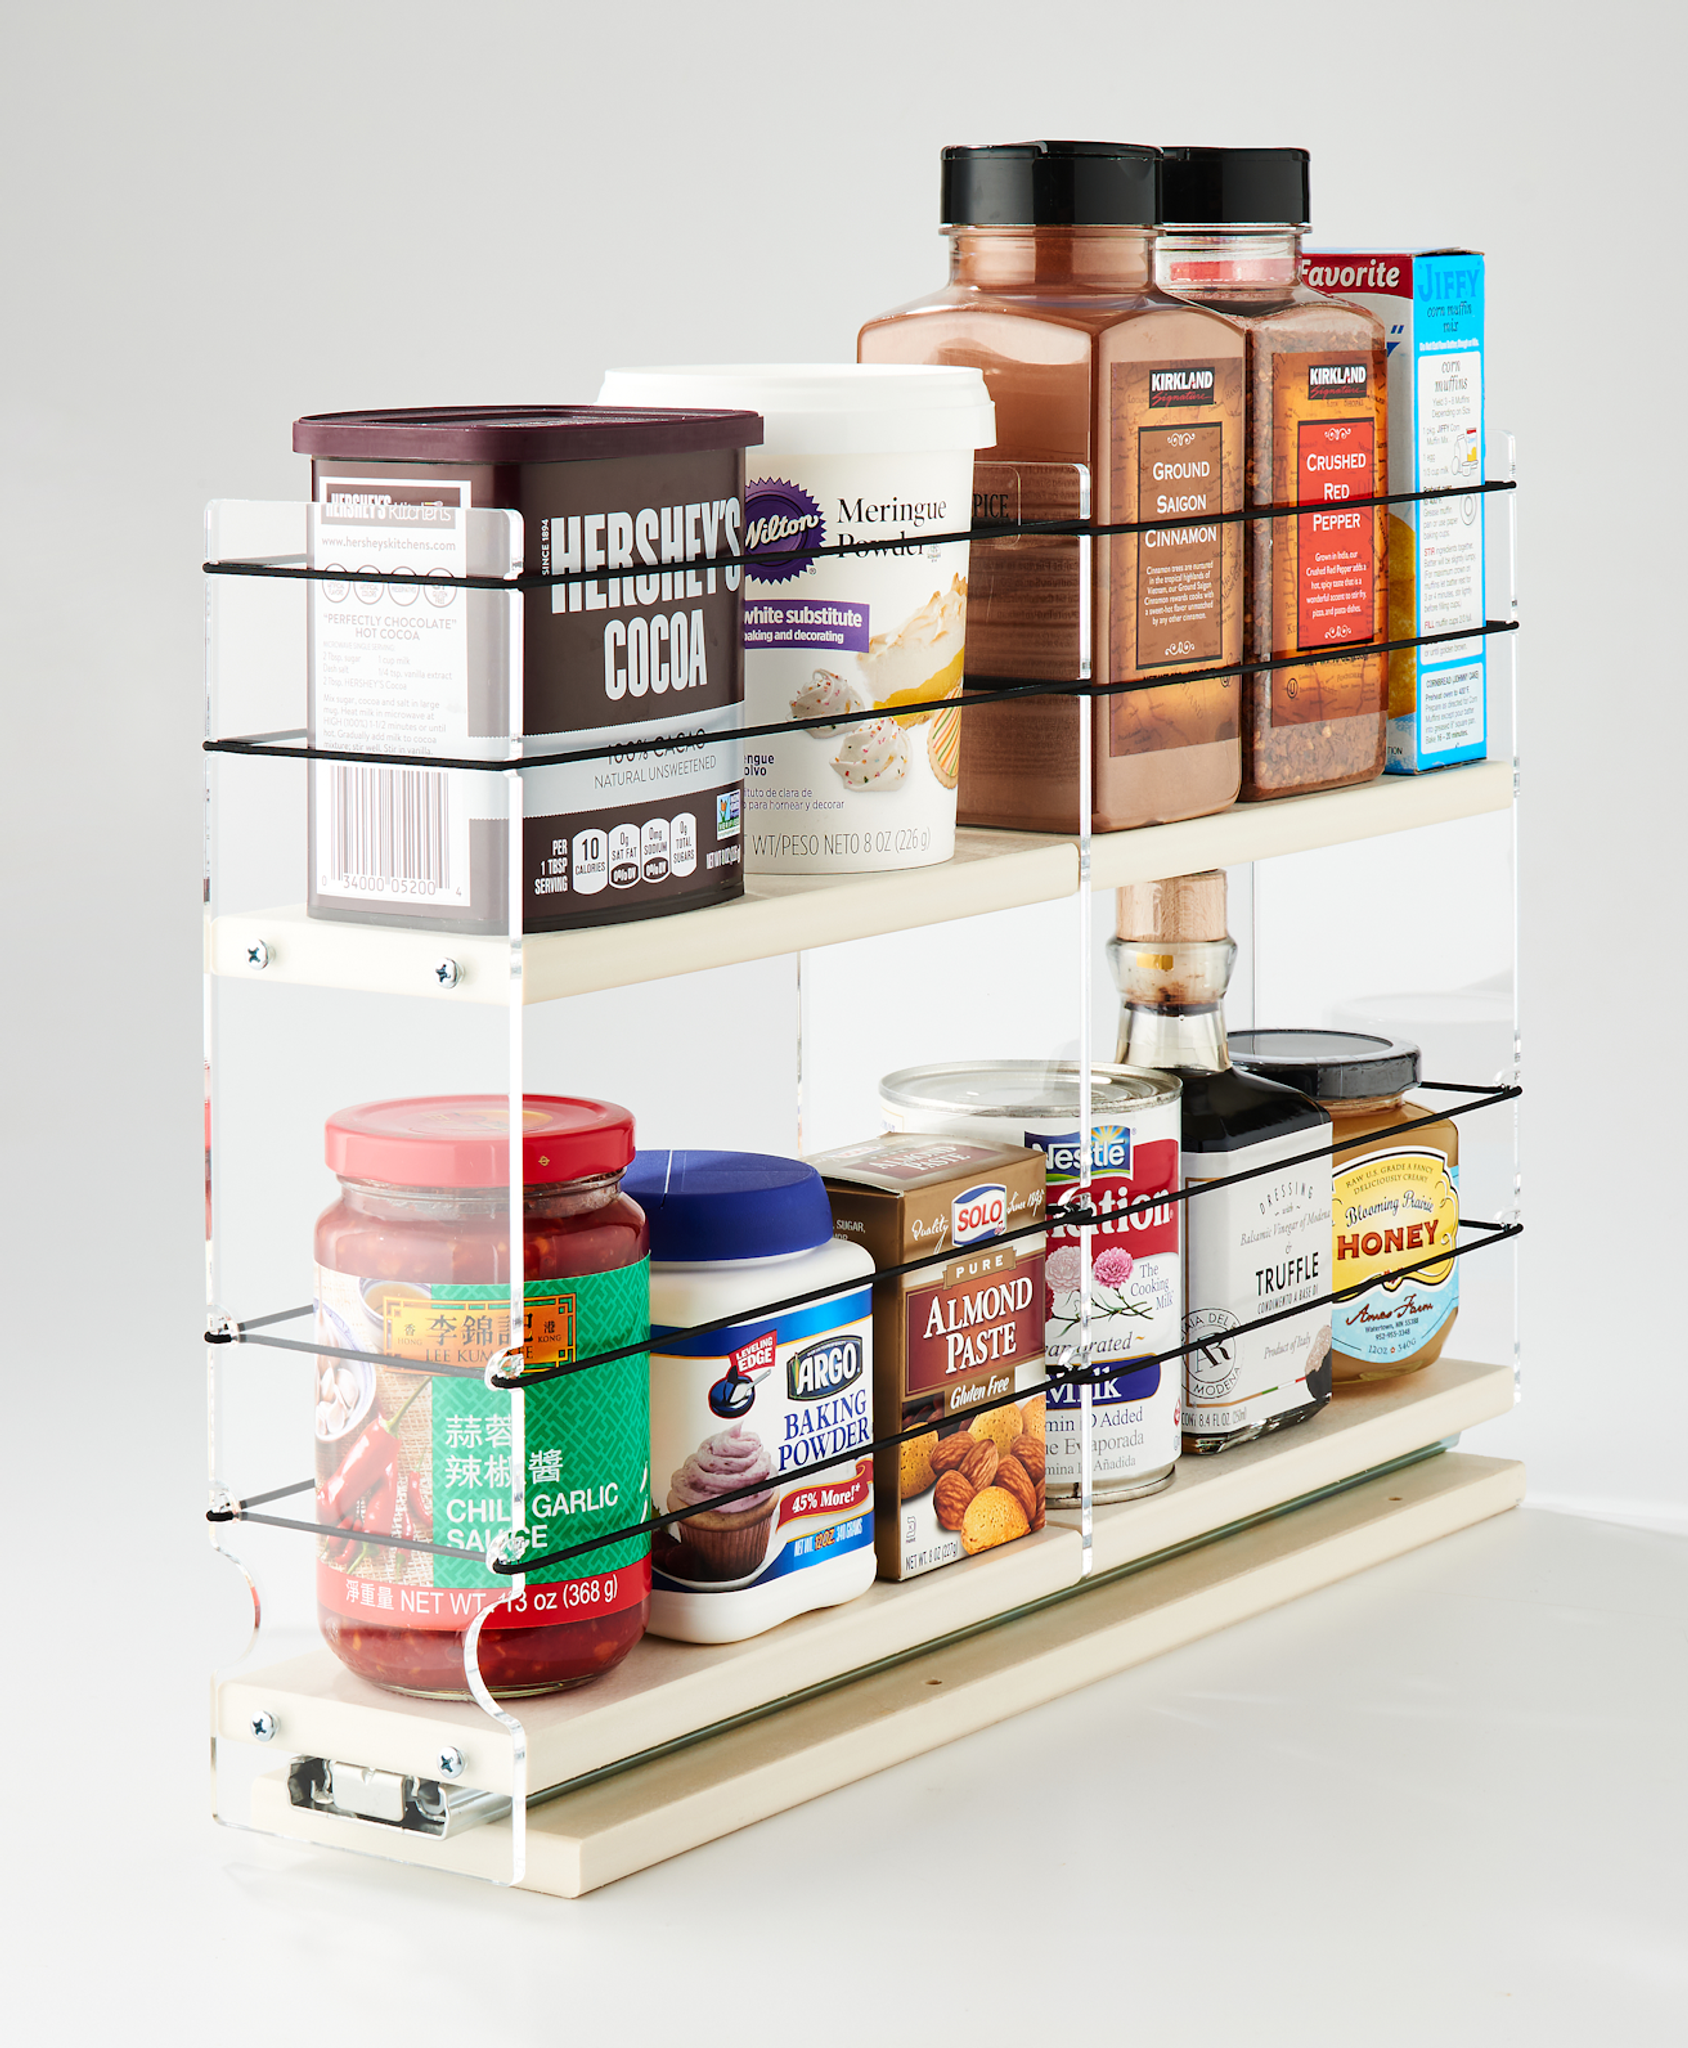 Vertical Spice 3x2x18 Spice Rack Drawer 2 Tiers, Cream, Large Jar Capacity with Flex-Sides, Sliding, Pullout